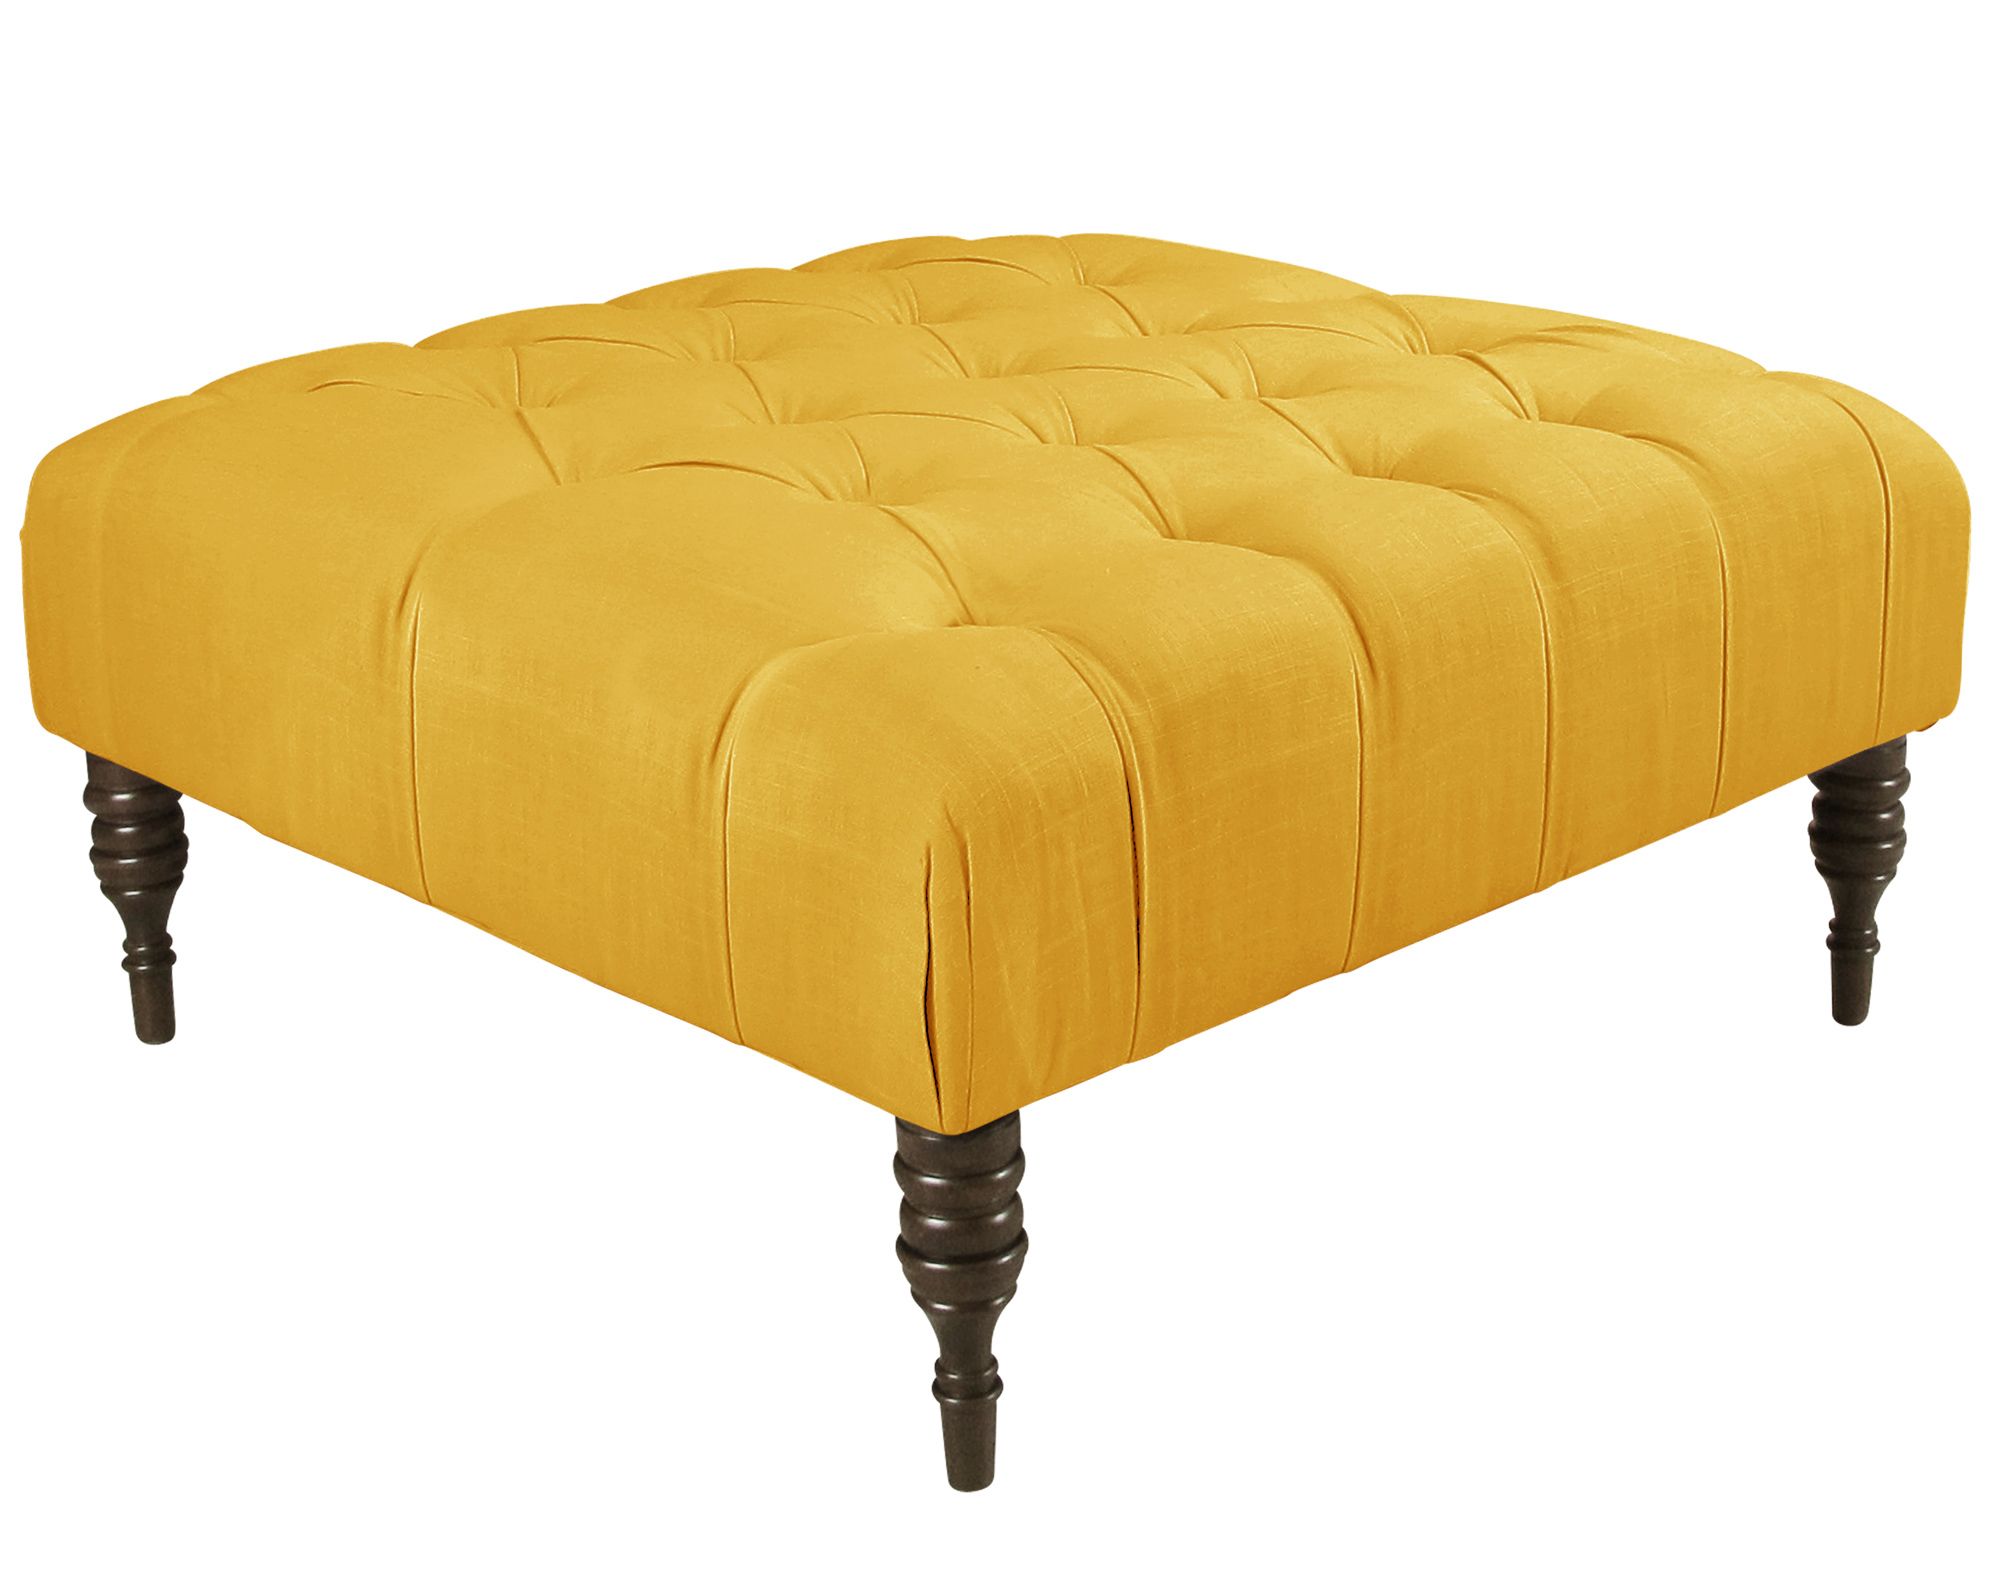 Tufted Cocktail Ottoman In Linen French Yellow | Skyline Furniture For Linen Fabric Tufted Surfboard Ottomans (View 3 of 20)